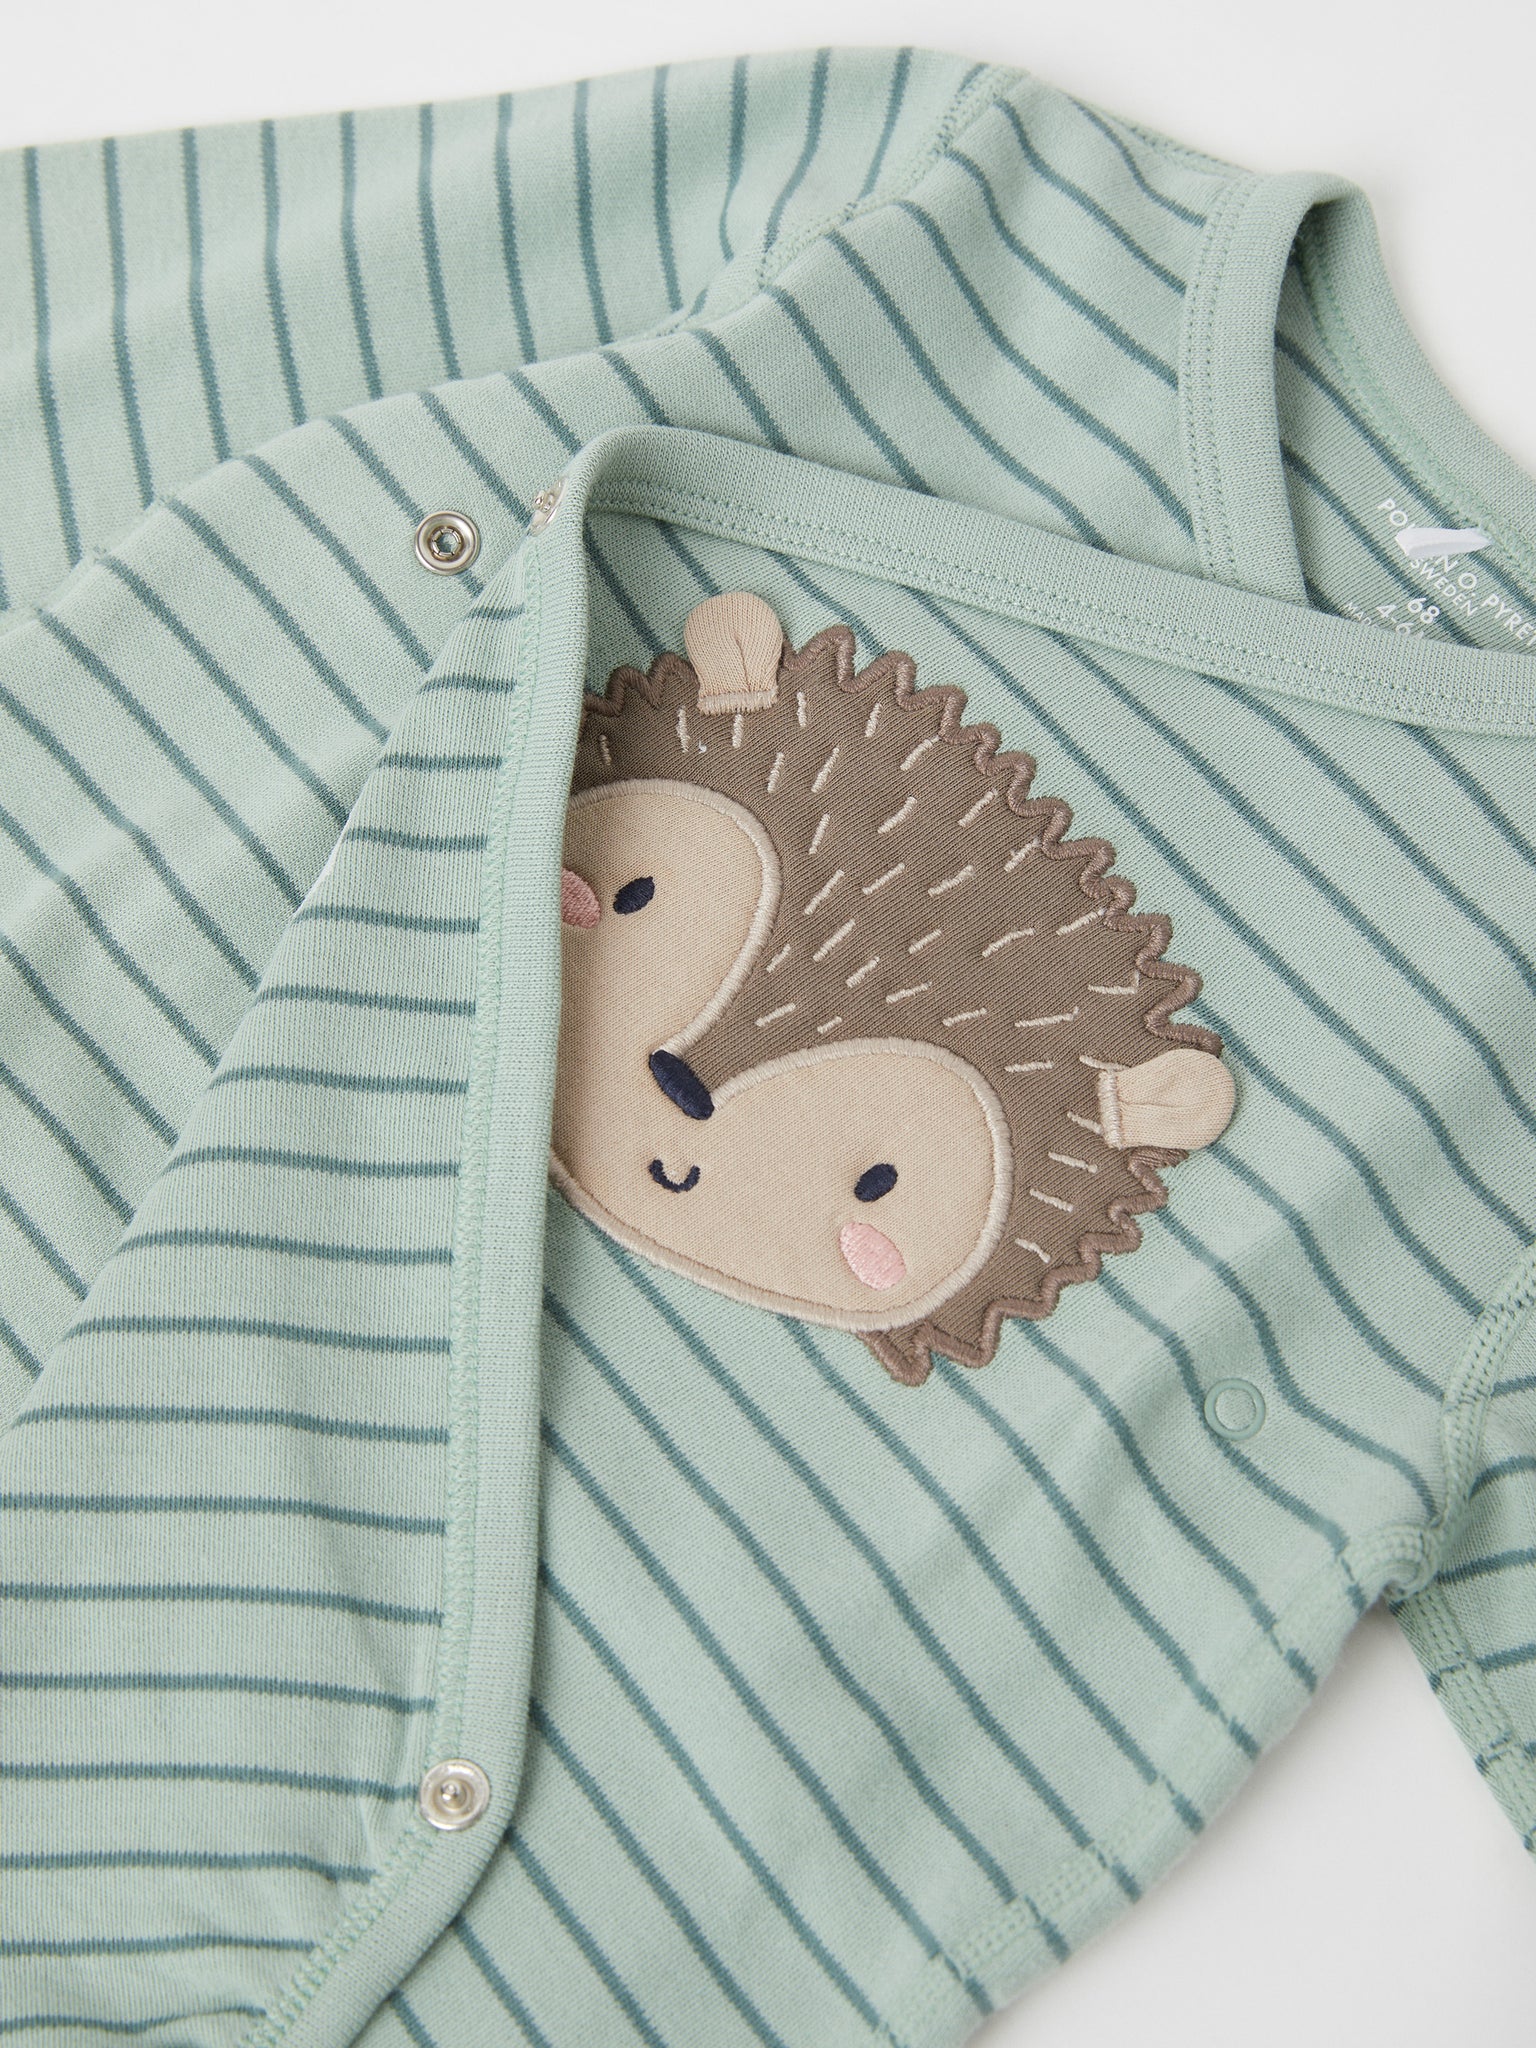 Hedgehog Print Wraparound Babygrow from the Polarn O. Pyret baby collection. Made using 100% GOTS Organic Cotton